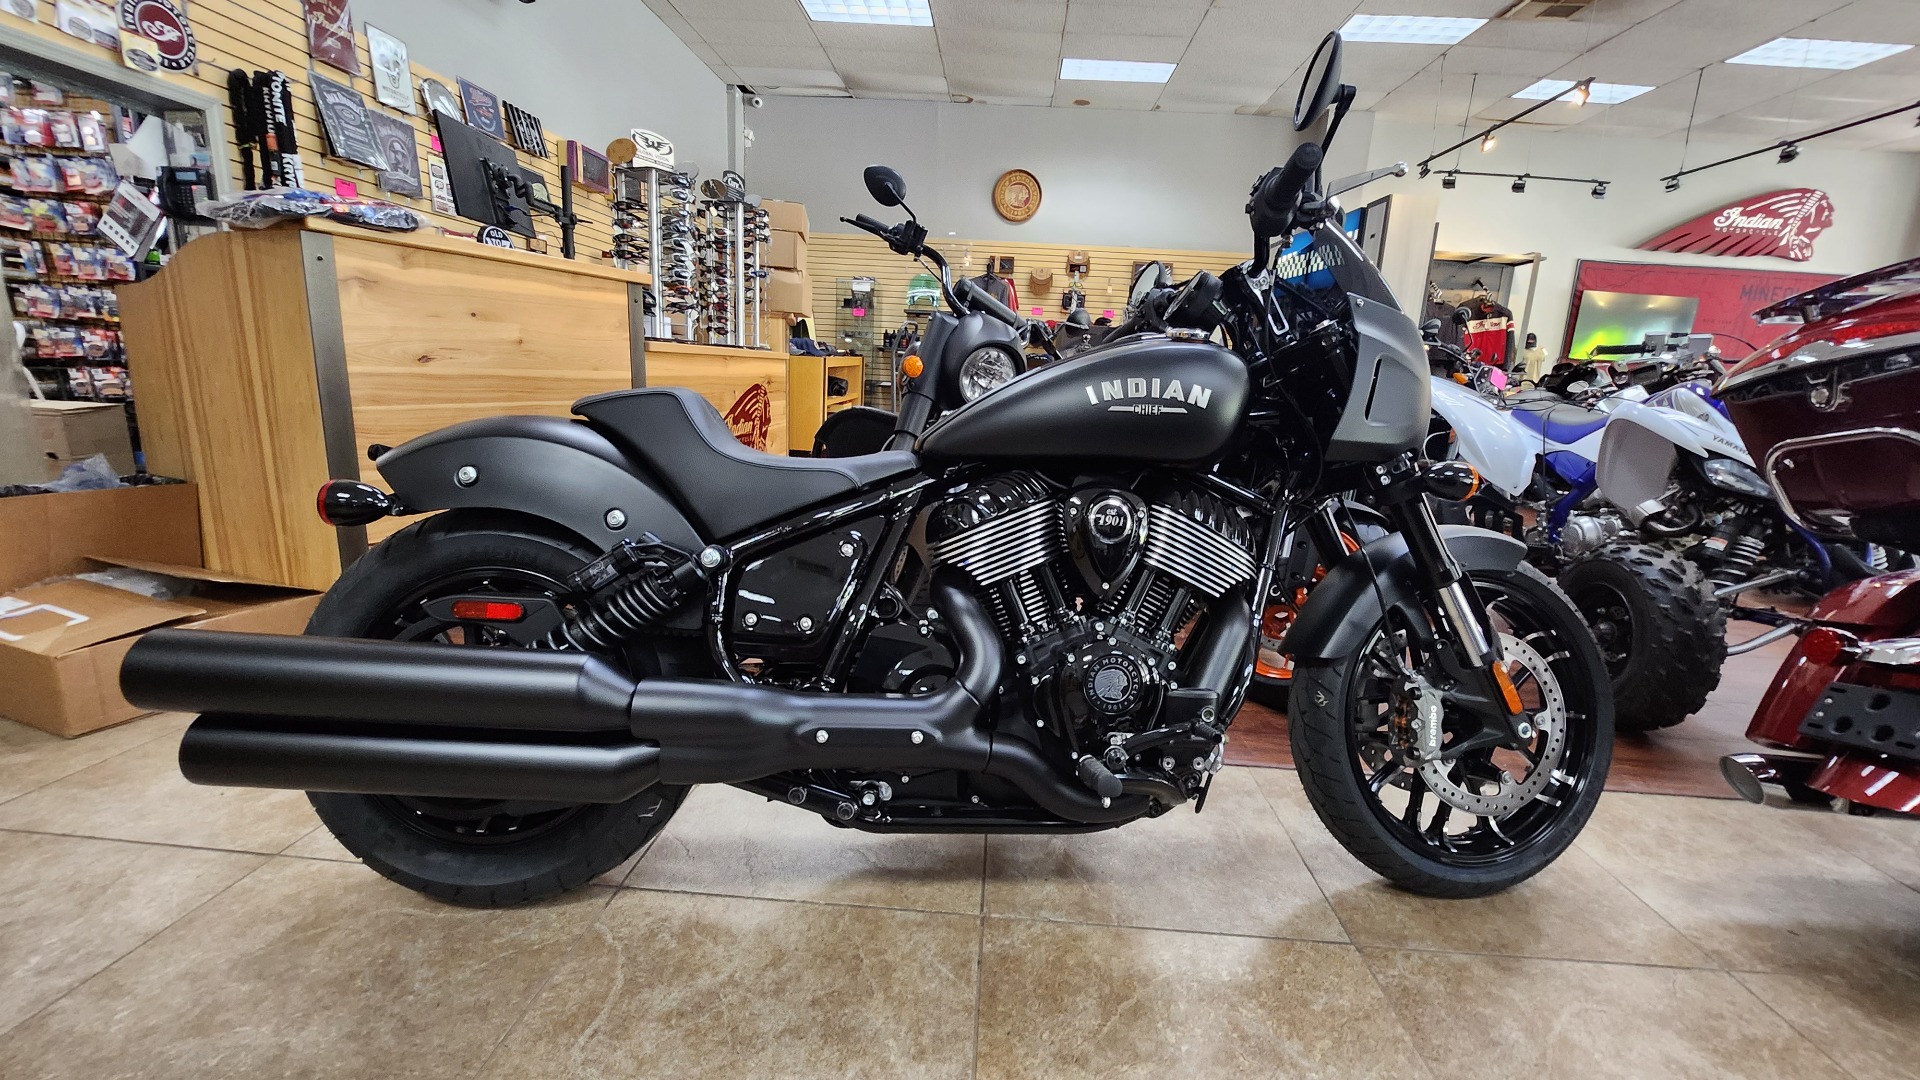 2023 Indian Motorcycle Sport Chief Dark Horse® in Mineola, New York - Photo 1